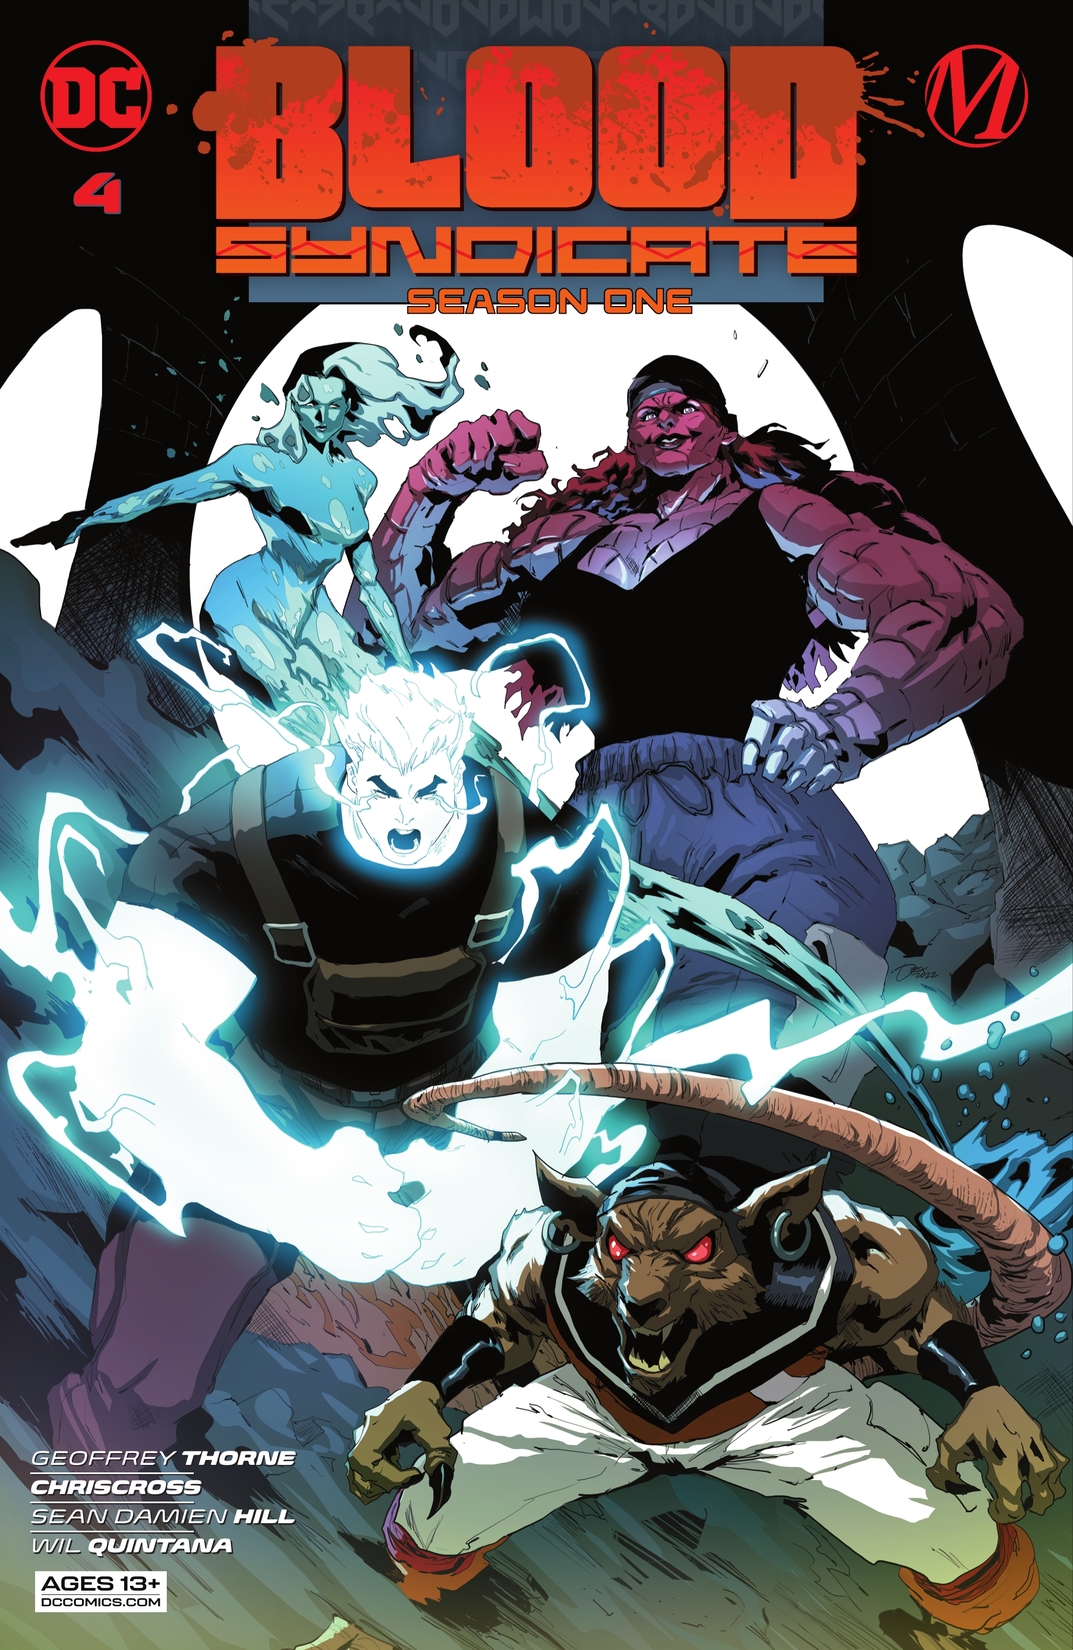 Blood Syndicate: Season One #4 preview images